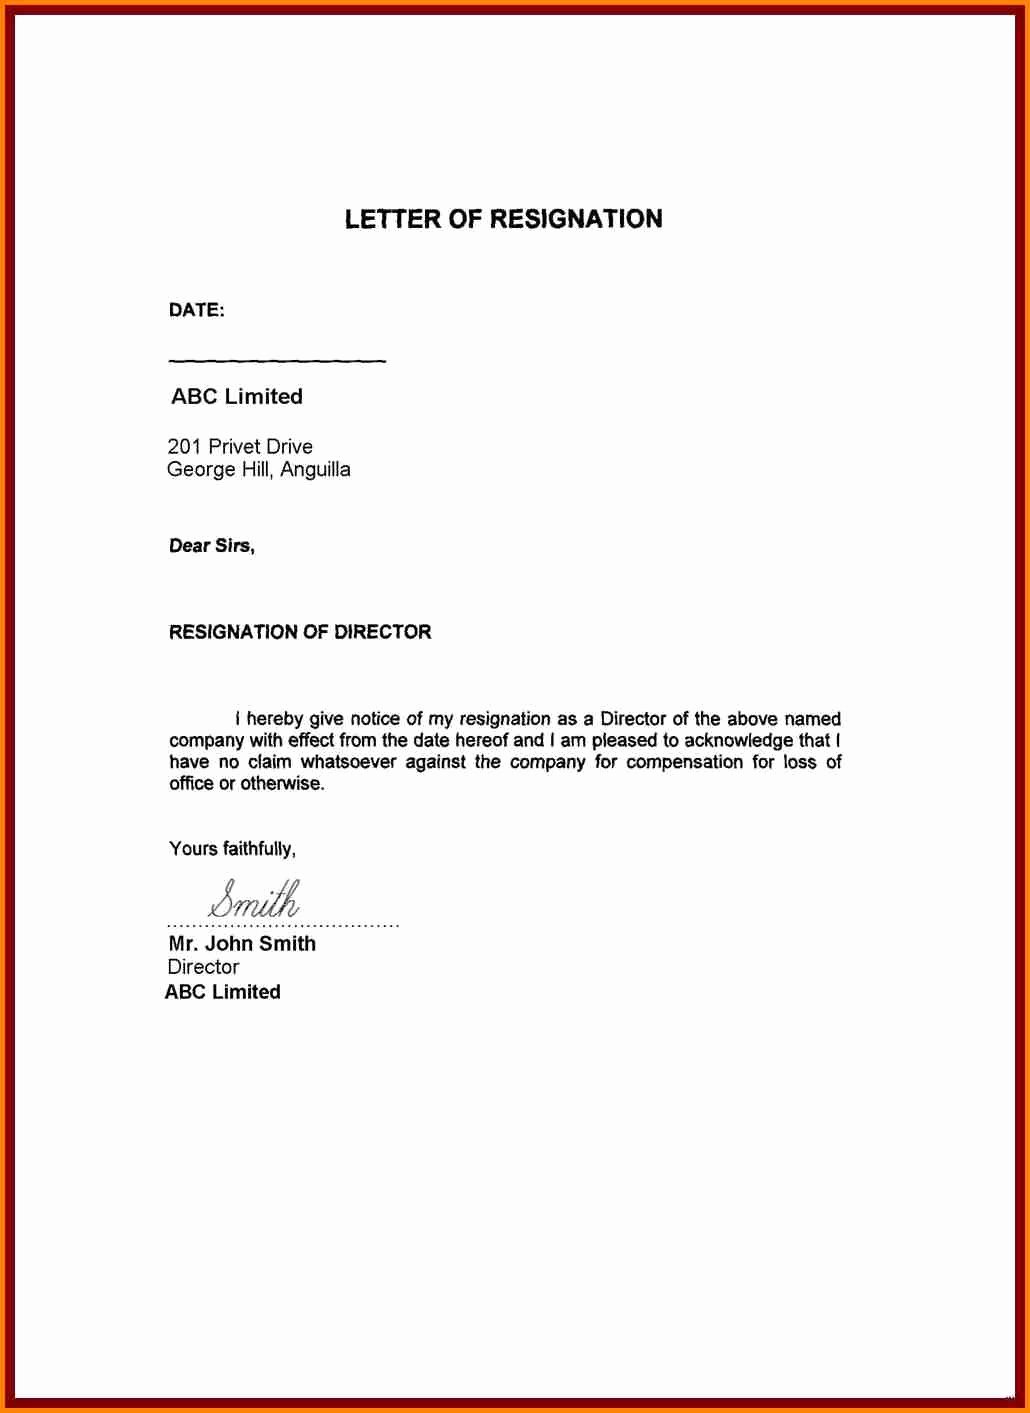 Resignation Letter Personal Reasons Lovely 9 Due to Personal Reasons Resignation Letter